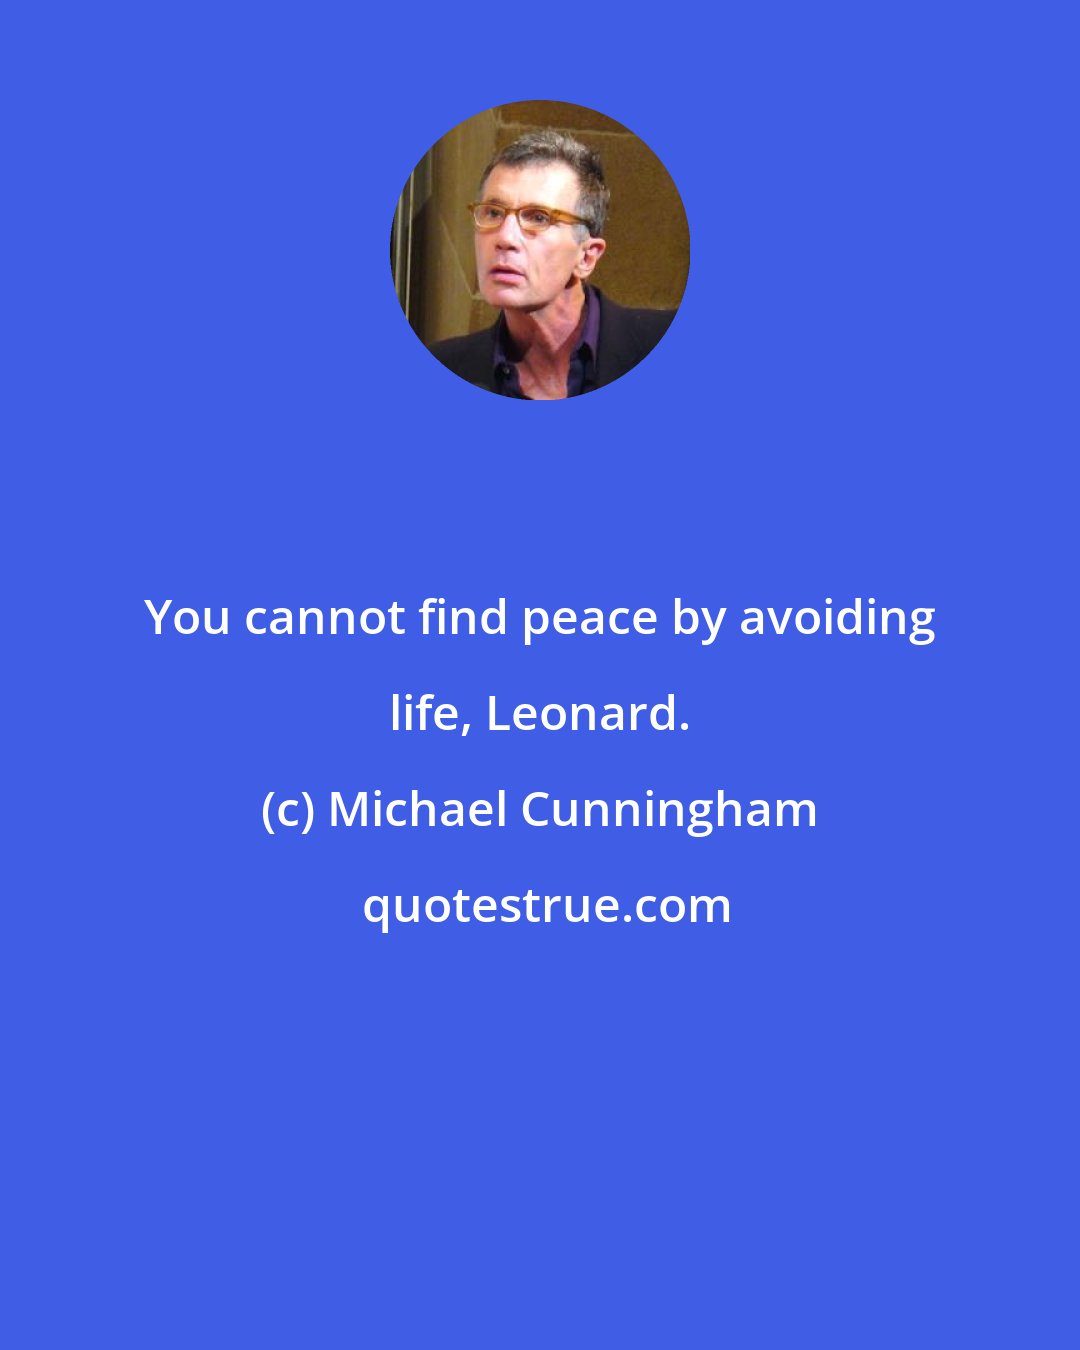 Michael Cunningham: You cannot find peace by avoiding life, Leonard.